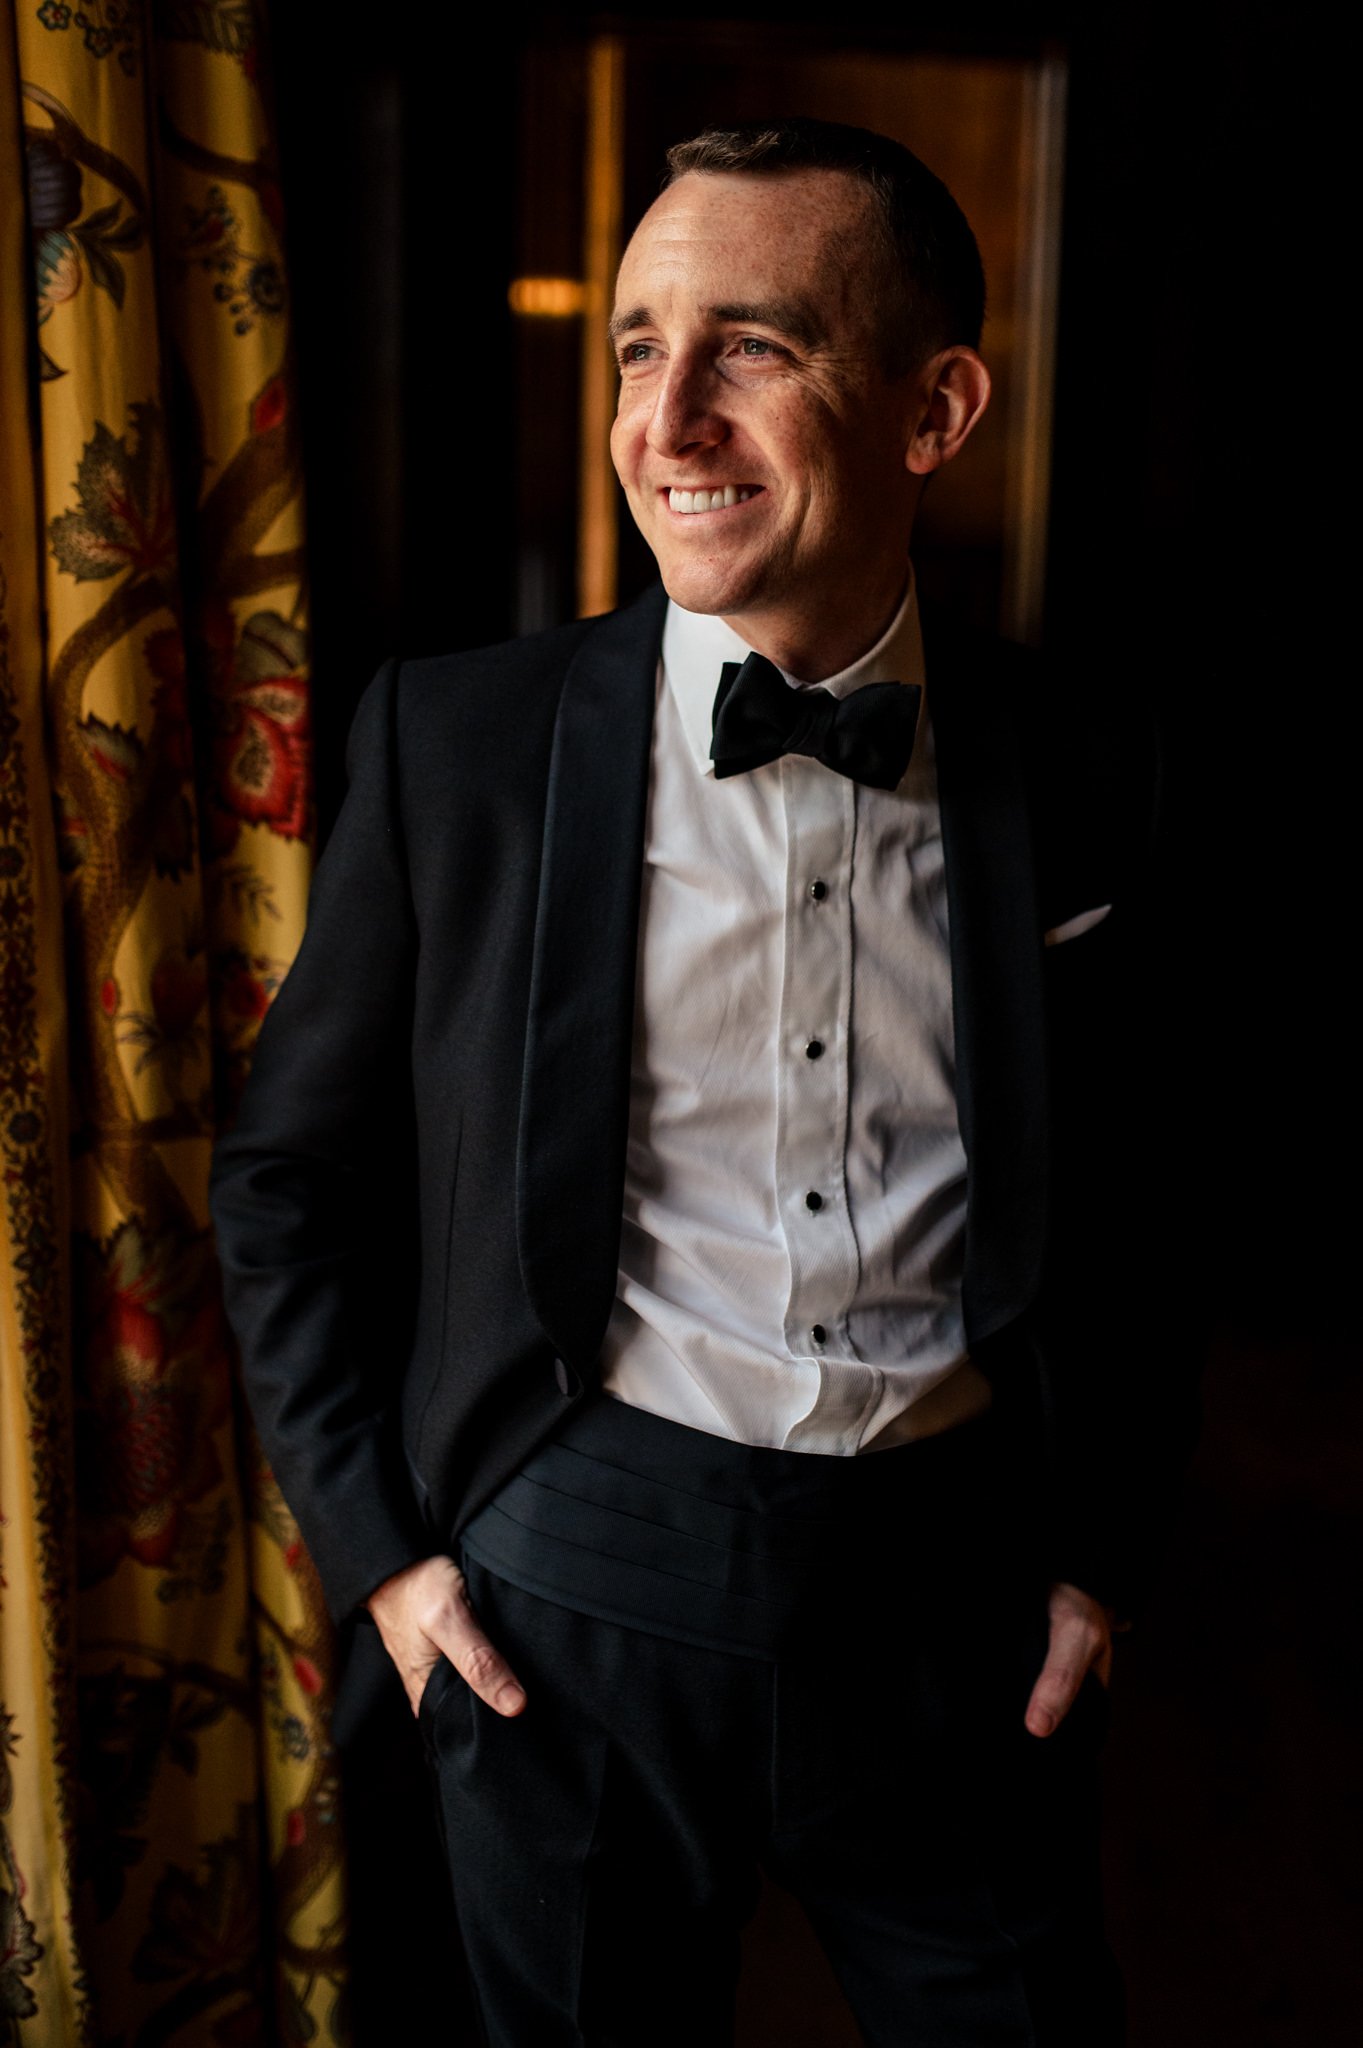 A man in a tuxedo smiles in front of a curtain.